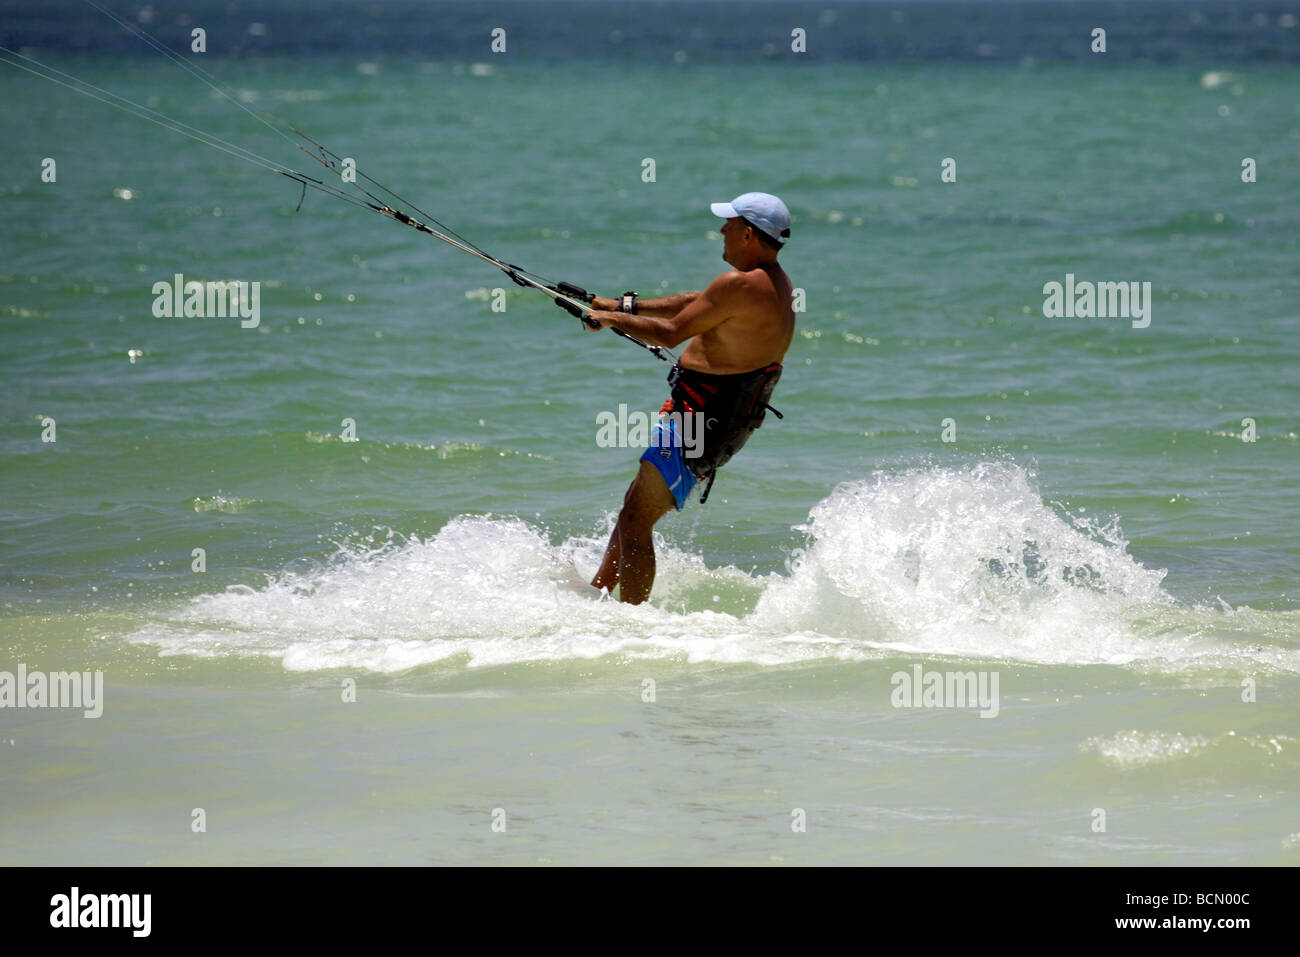 Man kite surfing on Holbox island, Quintana Roo, Yucatán Peninsula, Mexico, a unique Mexican destination in the Yucatan Channel, Stock Photo